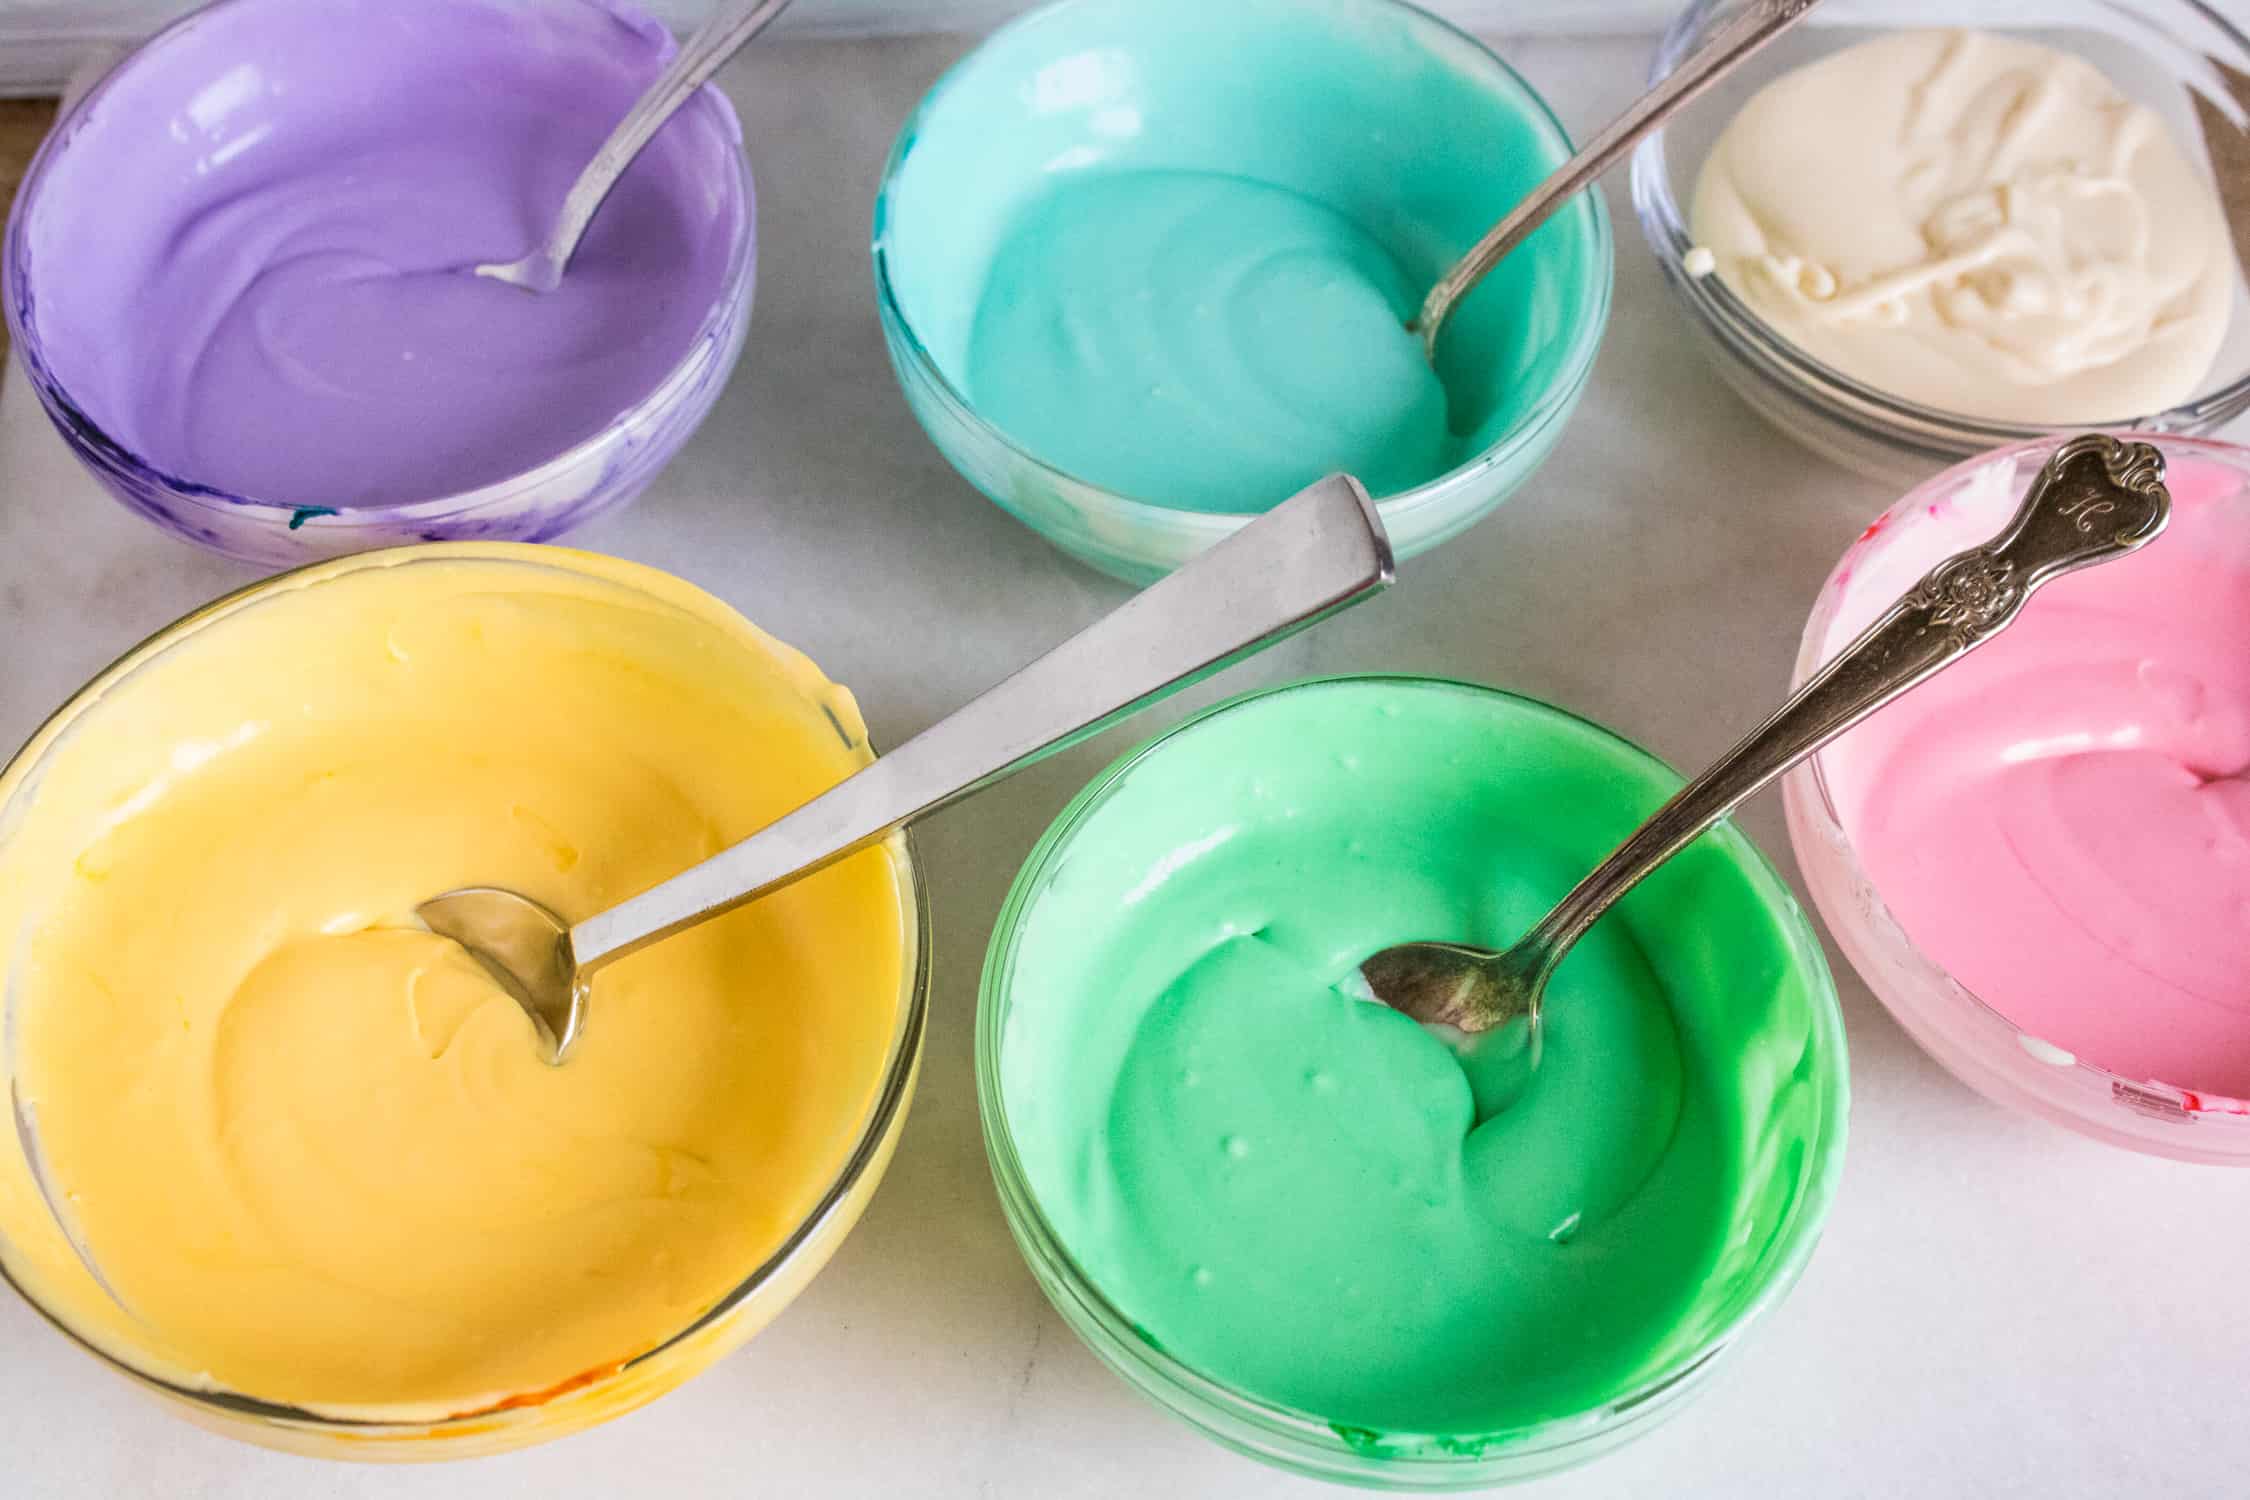 Birthday cake ice cream mix divided into 5 small mixing bowls and colored with purple, yellow, blue, green and pink food coloring